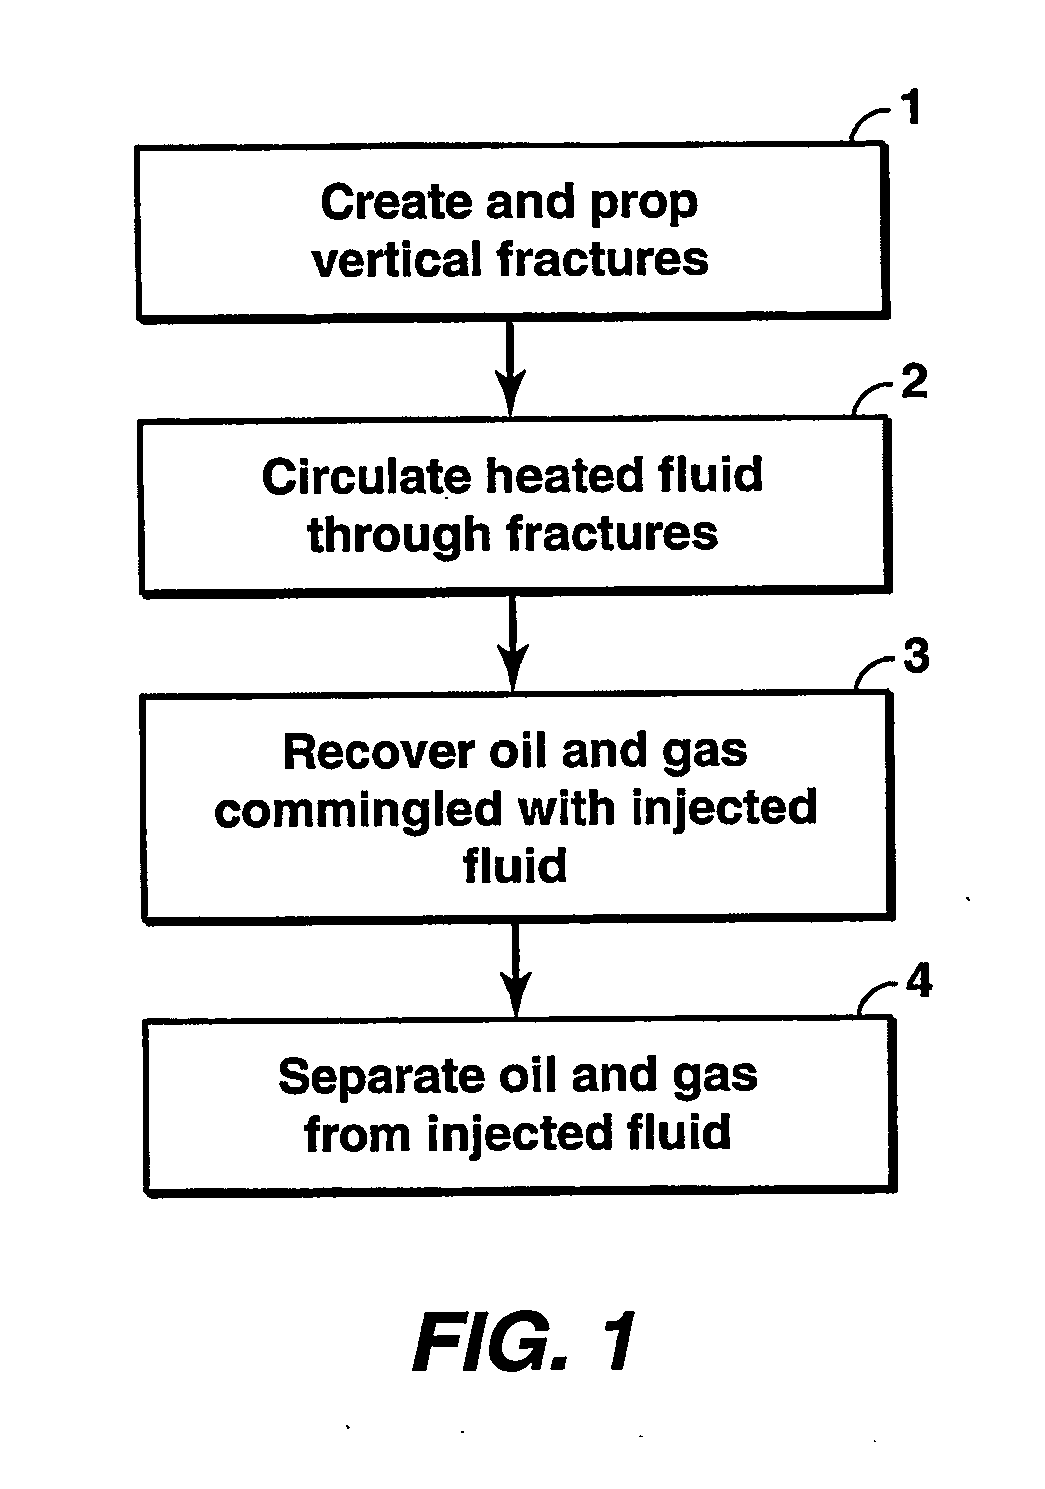 Hydrocarbon recovery from impermeable oil shales